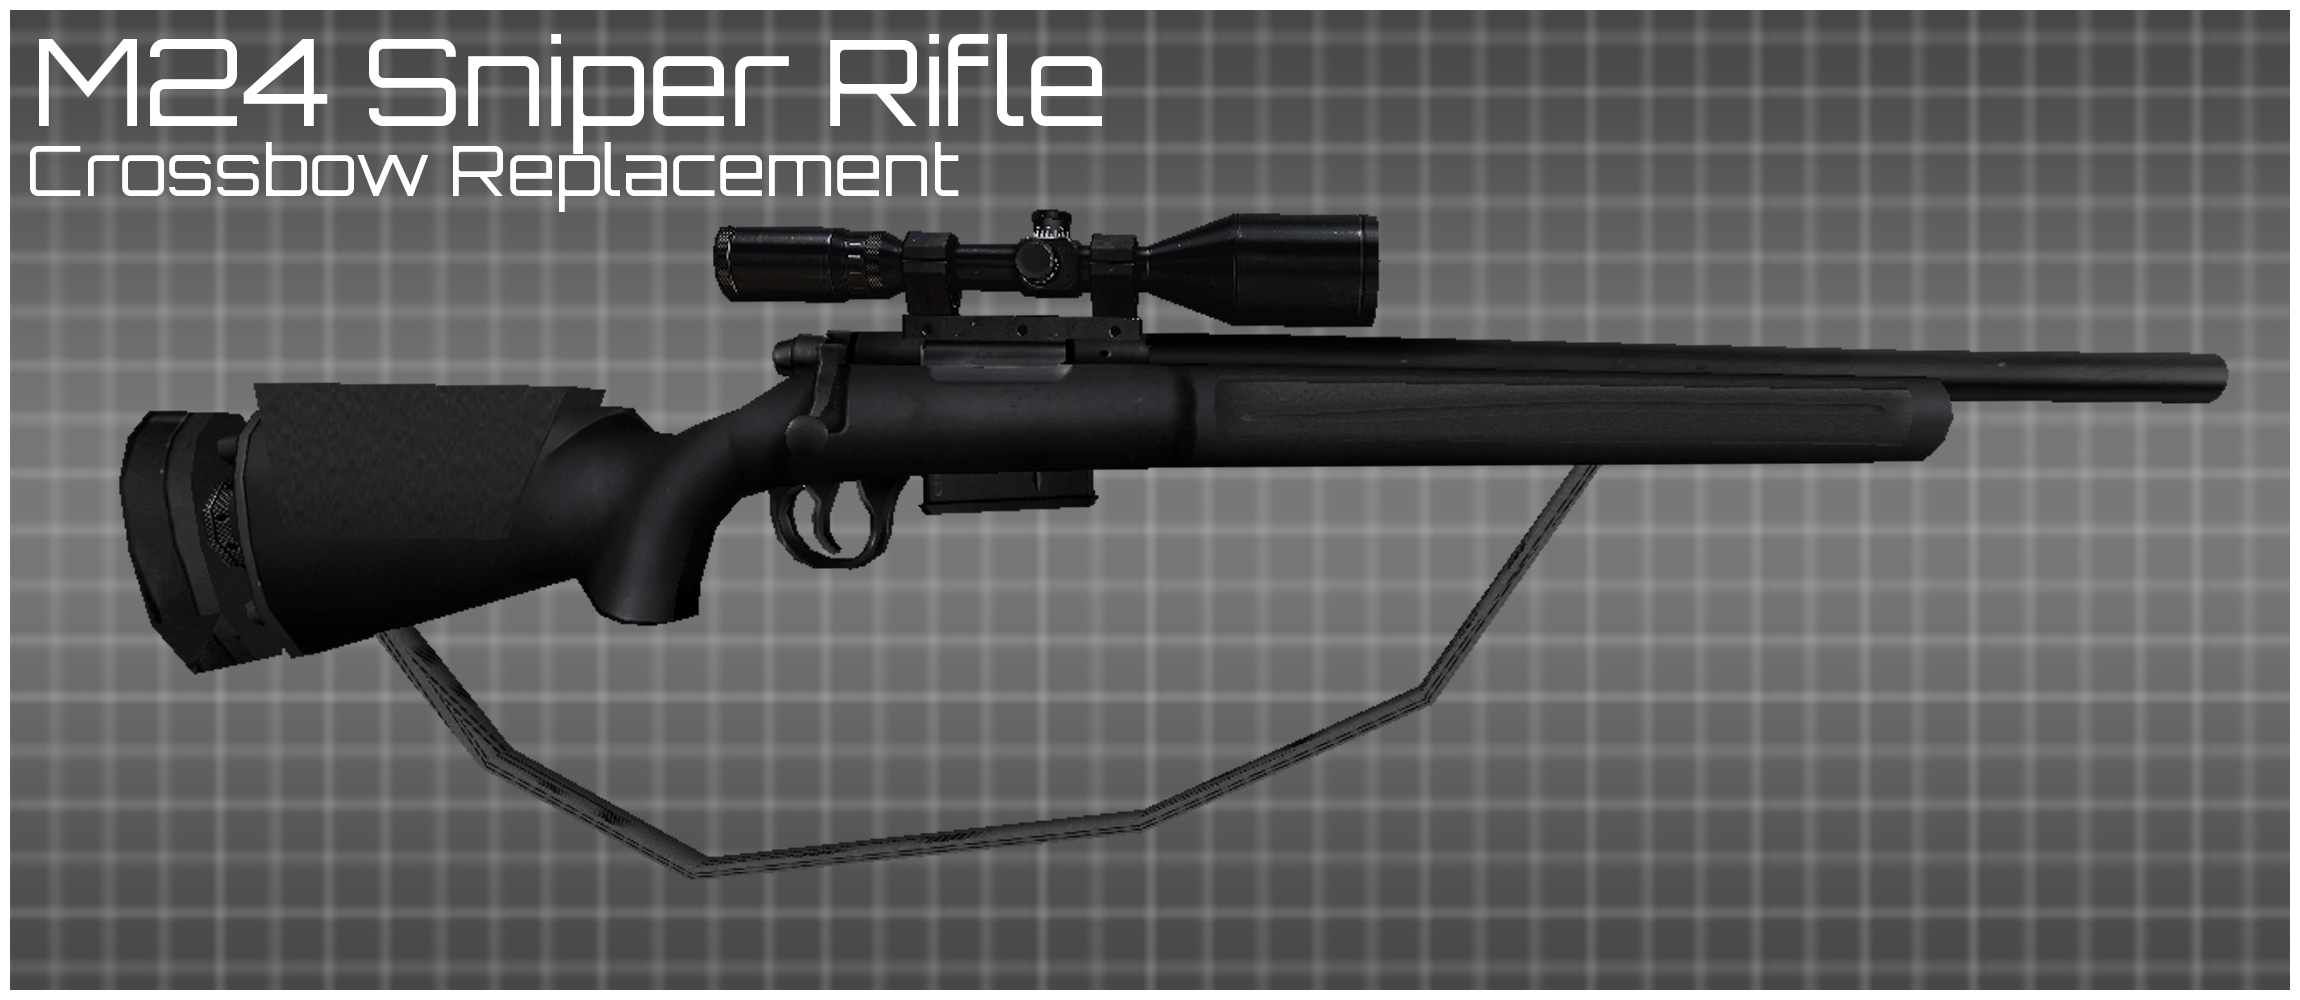 M24 Sniper Rifle Crossbow Replacement for Half-Life 1 addon - ModDB